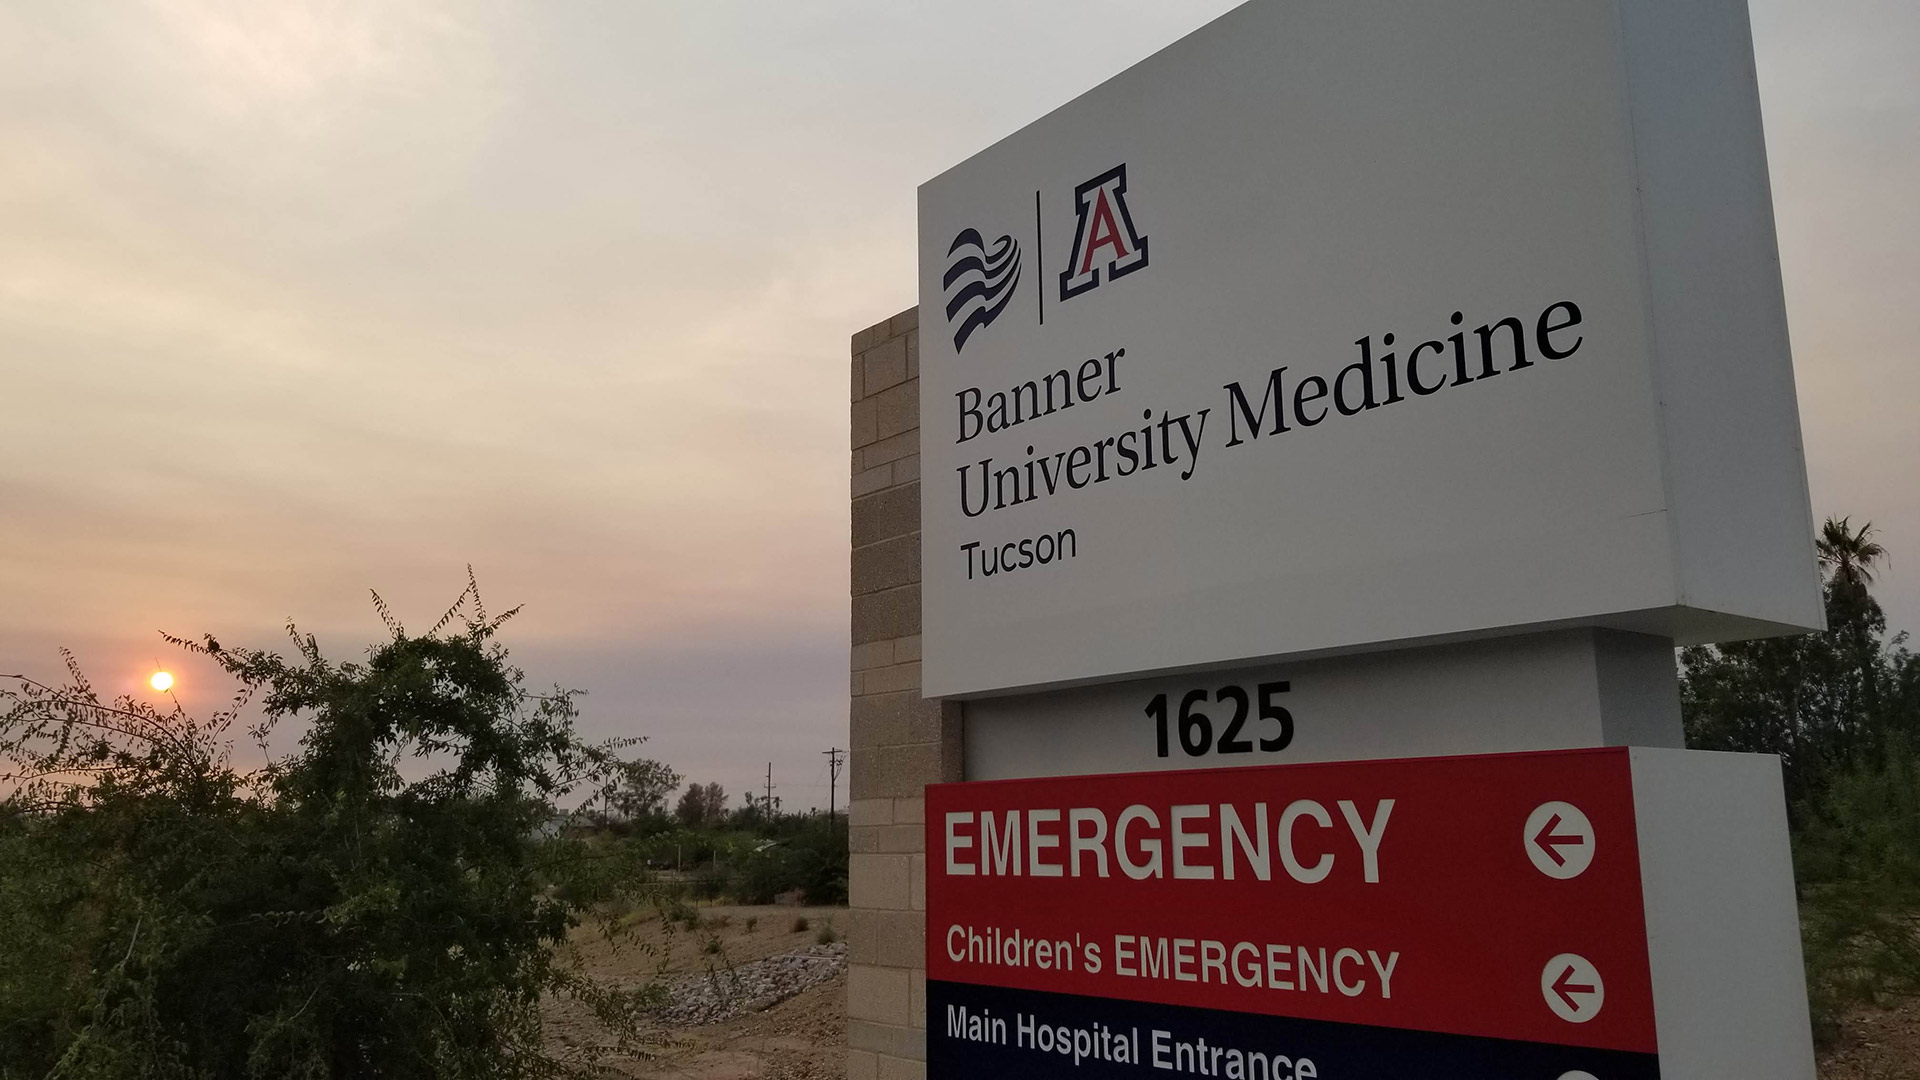 A sign outside the east entrance to Banner University Medicine directing visitors and patients to the emergency room.